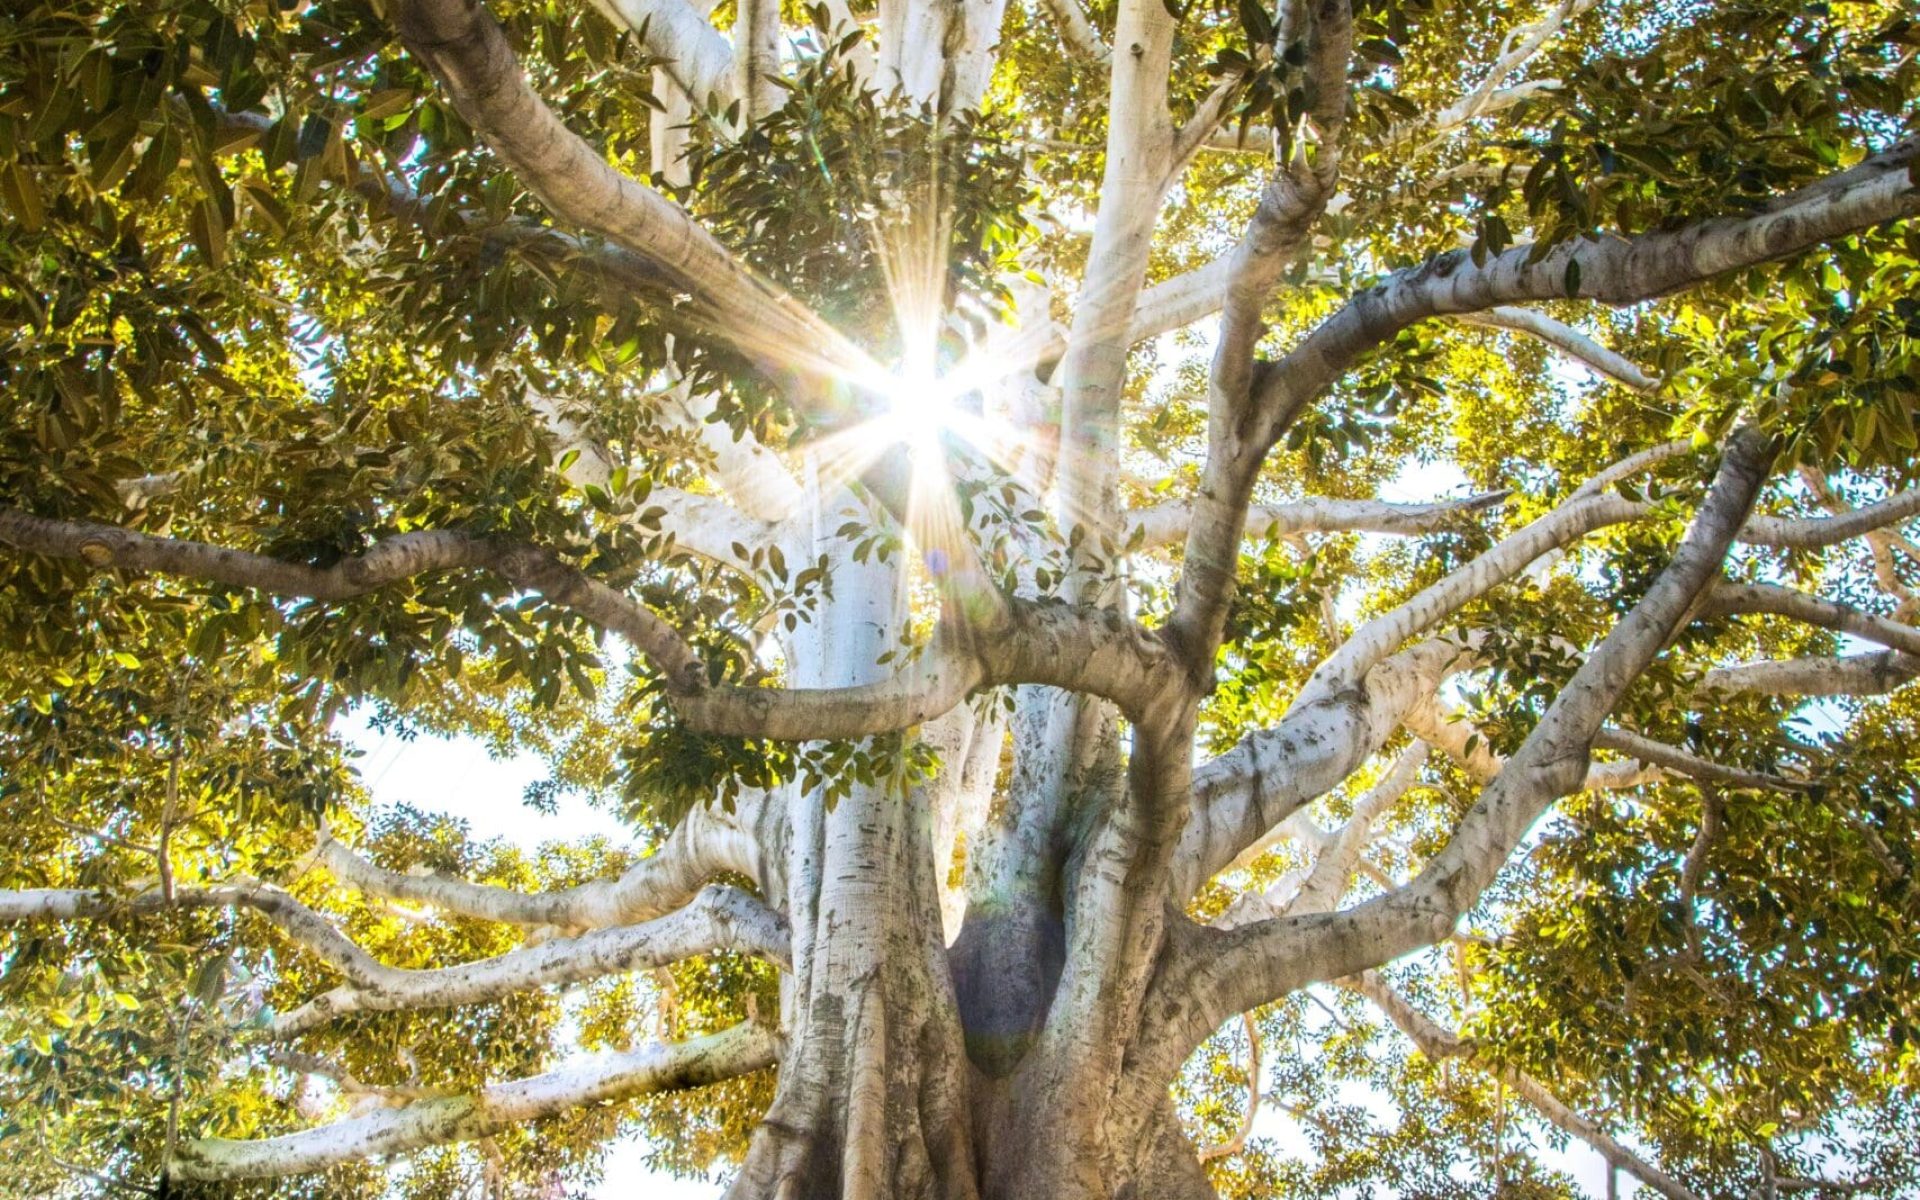 Majestic tree with sunlight shining through its branches, symbolizing spiritual travel